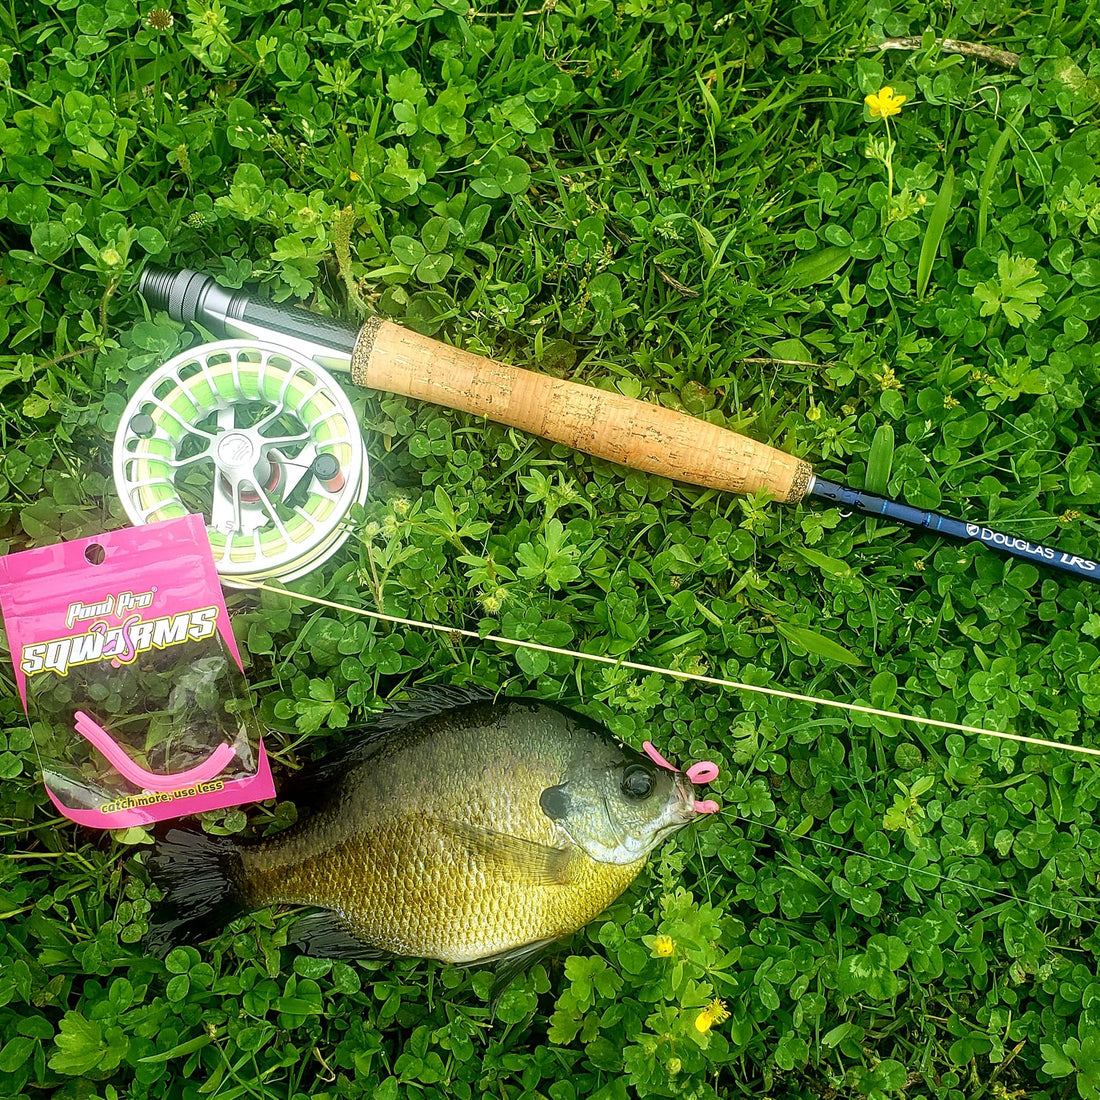 Panfish on a hook, caught using a Pond Pro Sqworm